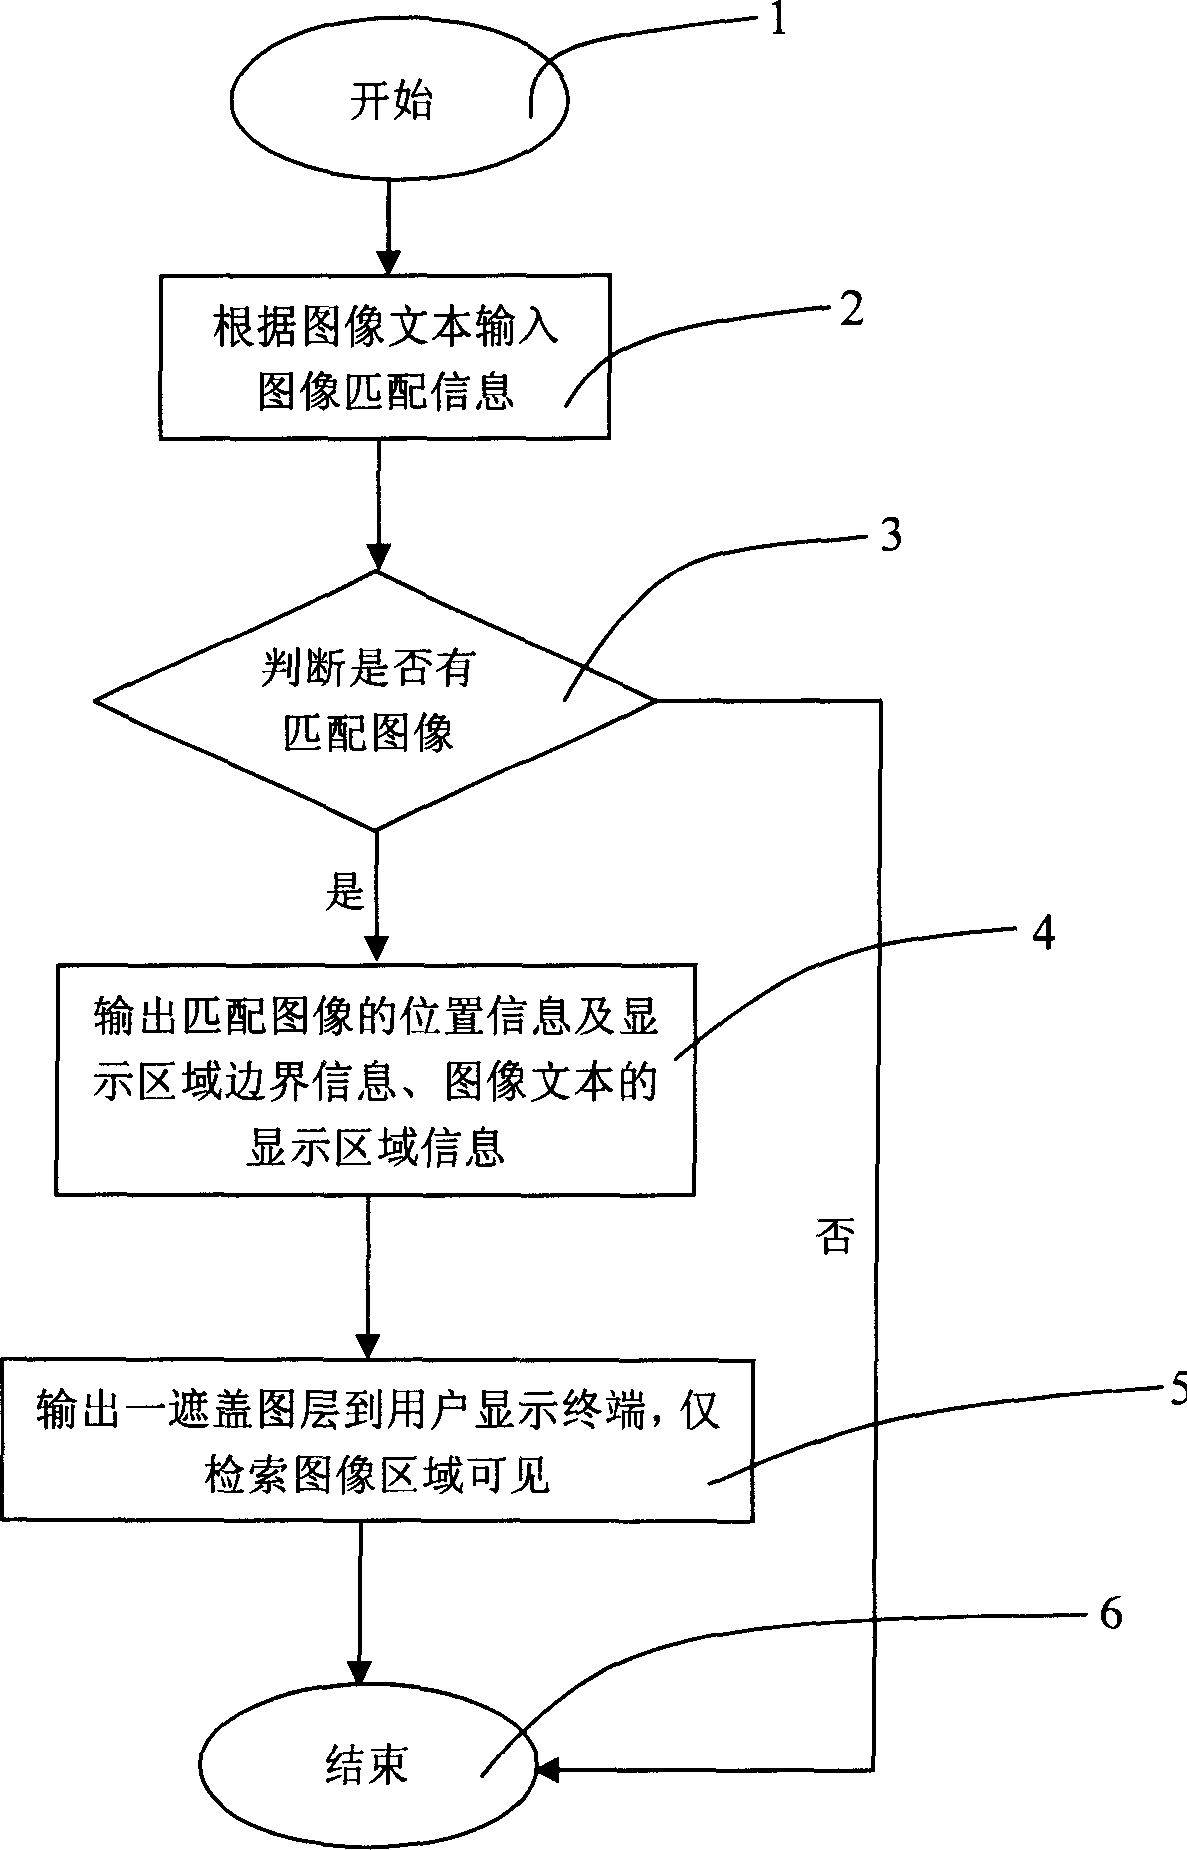 Multi-image-text based image search and display method